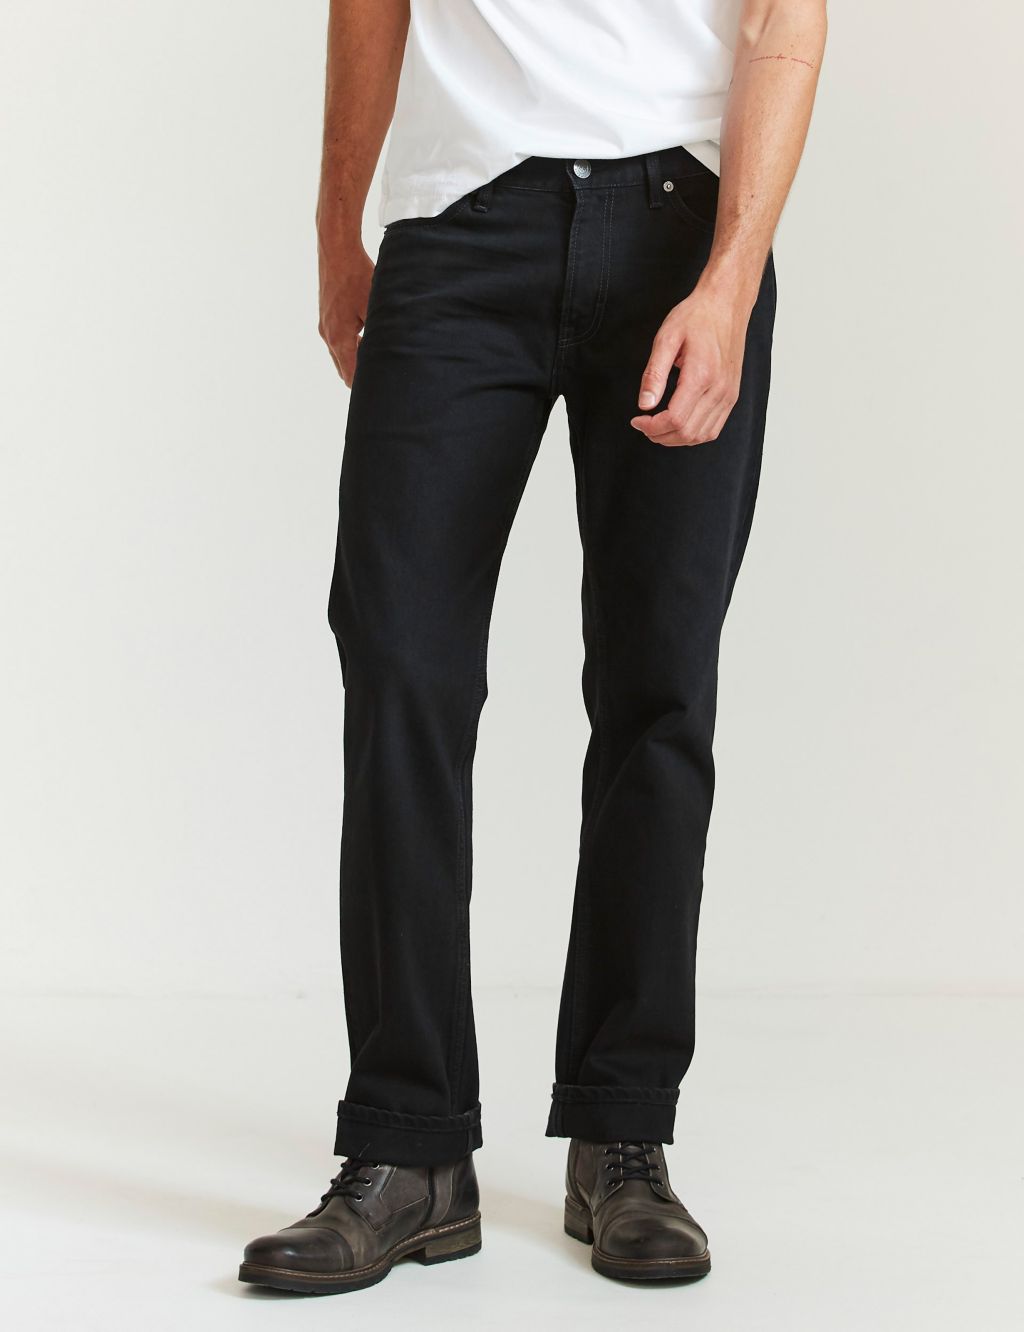 Straight Fit Pure Cotton 5 Pocket Jeans image 1